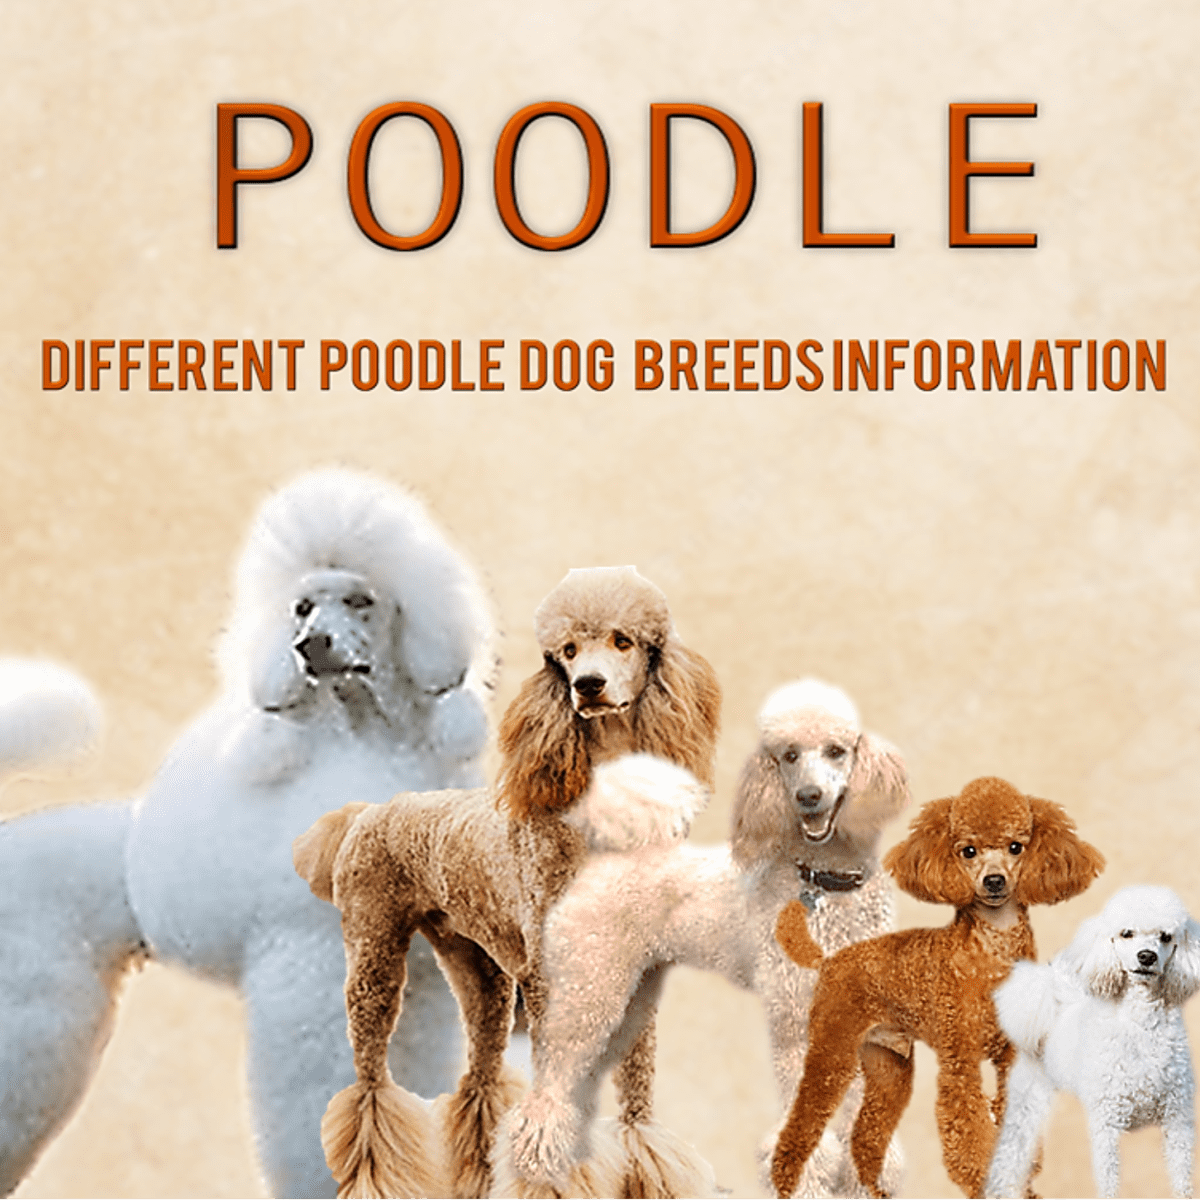 are moyen poodles hypoallergenic